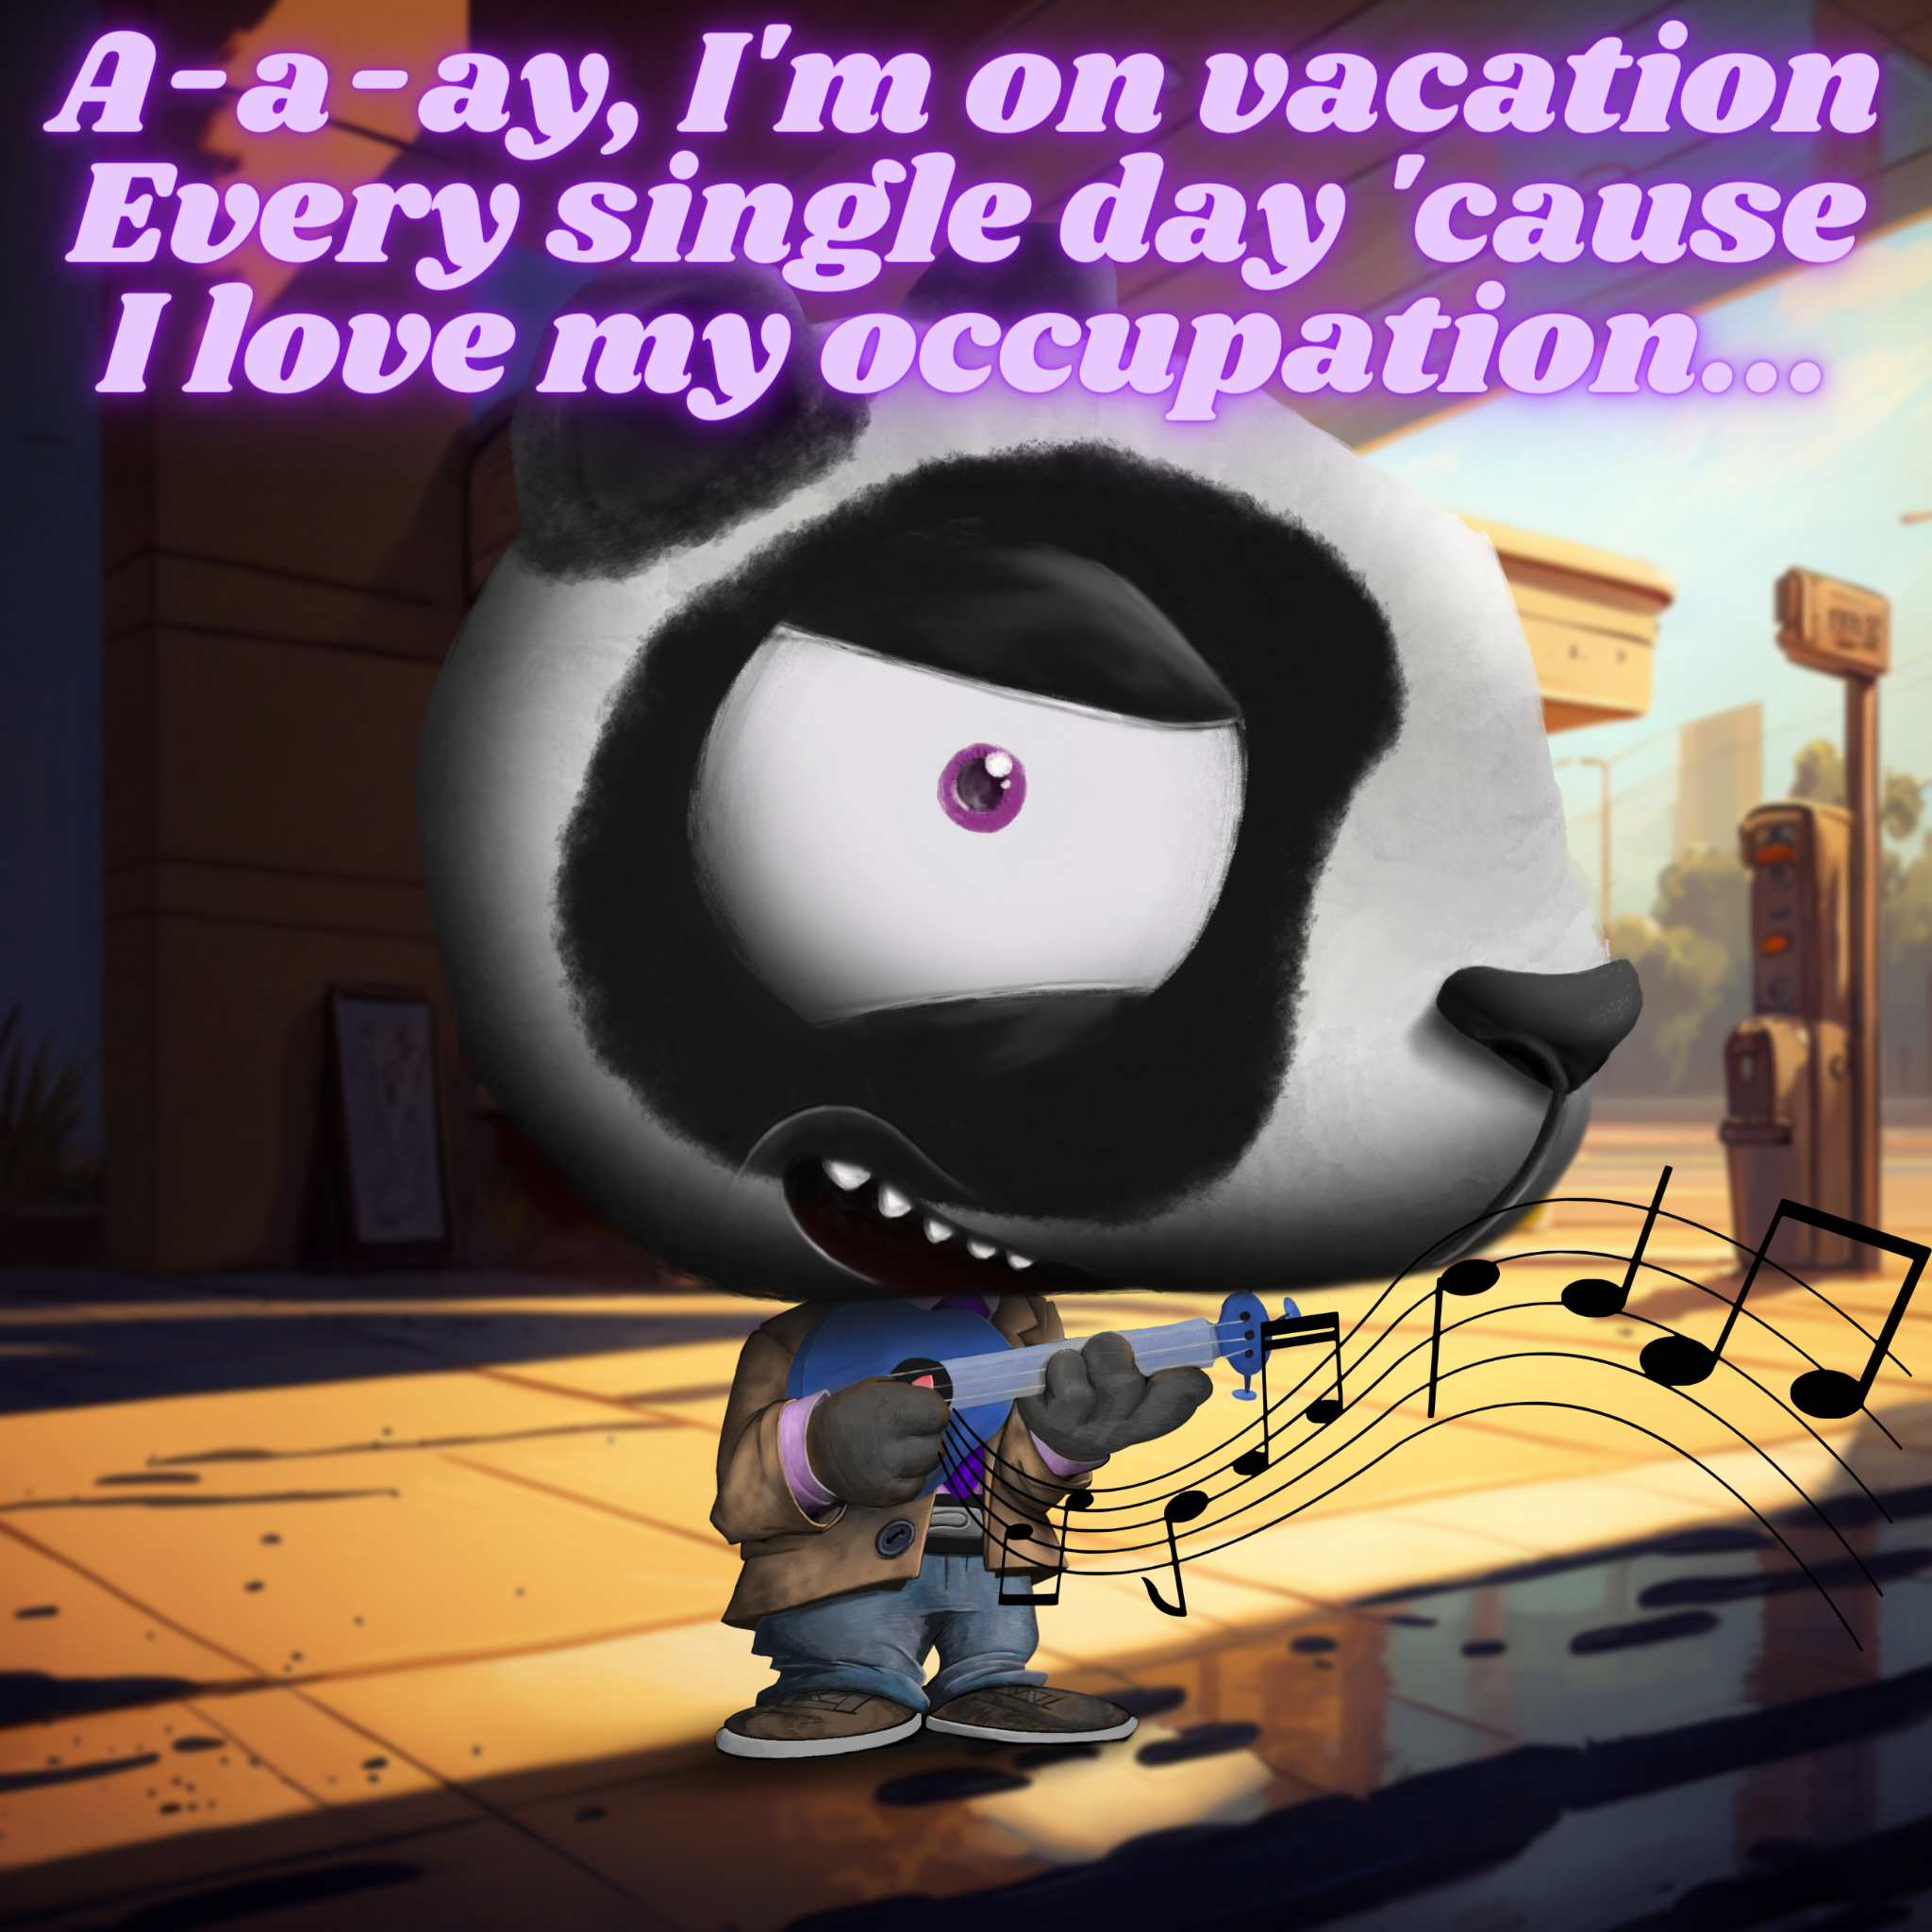 A-a-ay, I'm on vacation Every single day 'cause I love my occupation.png